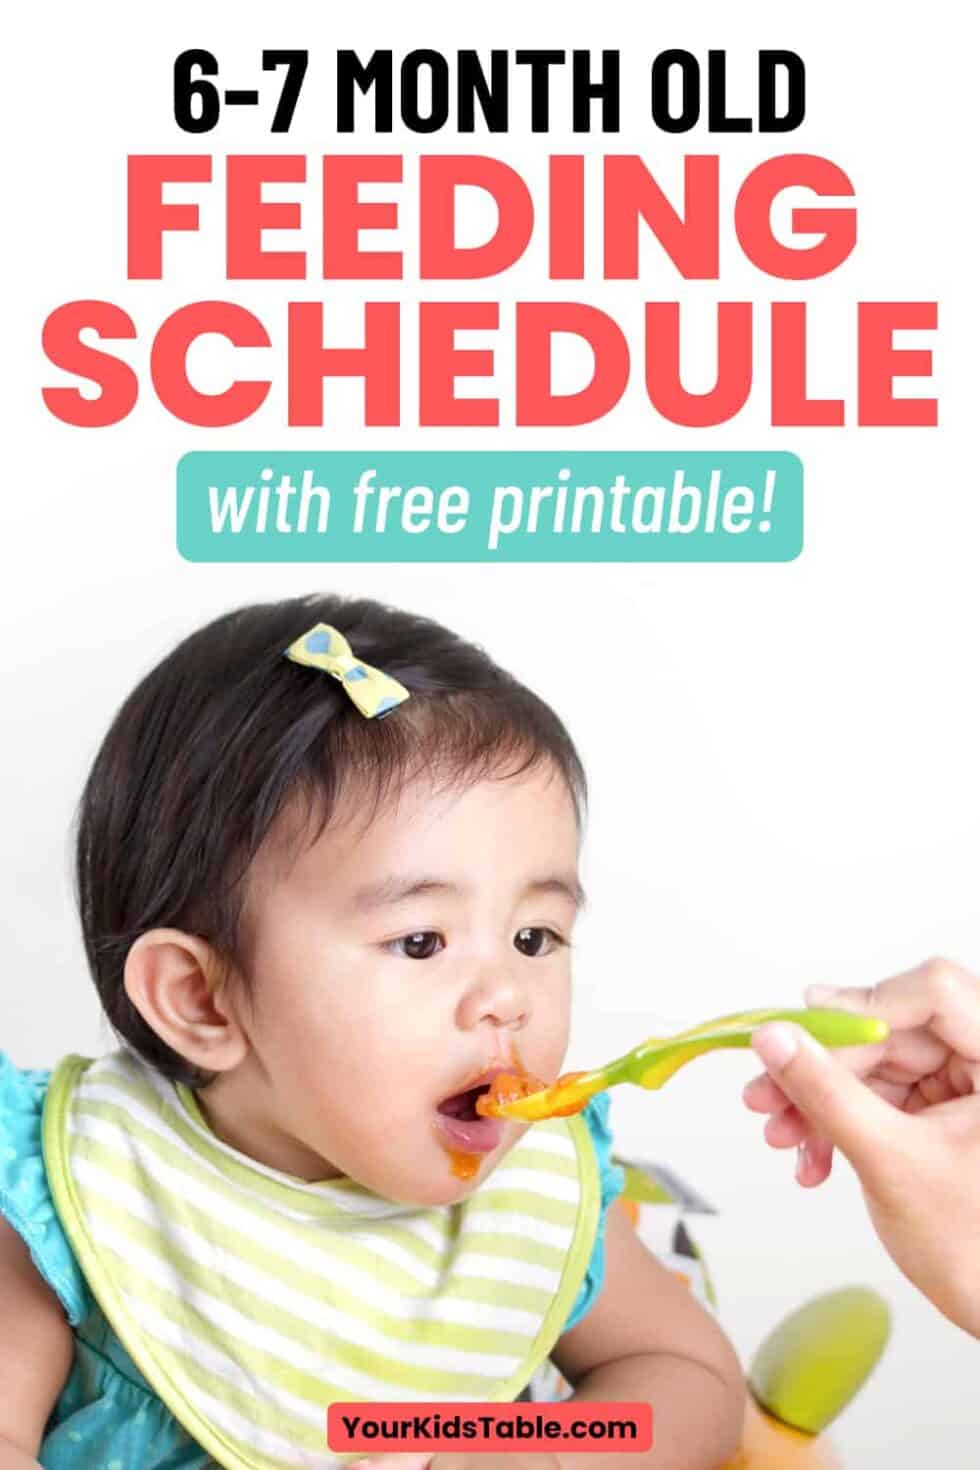 6-7-month-old-feeding-schedule-with-free-printable